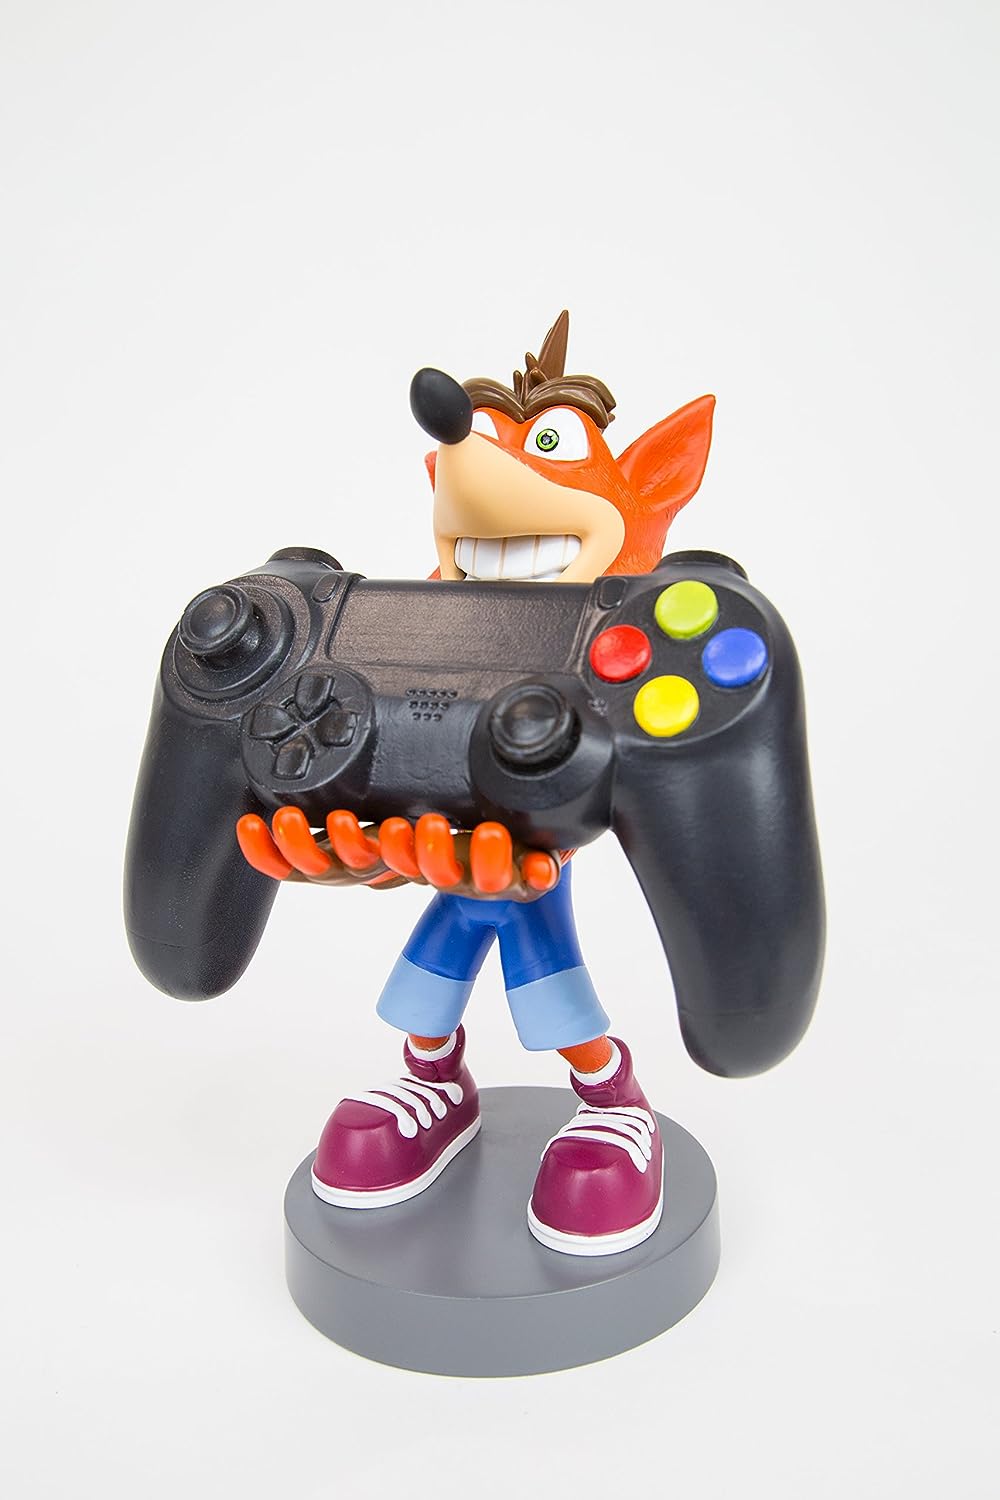 Cable Guys Activision Crash Bandicoot Controller/Device Holder